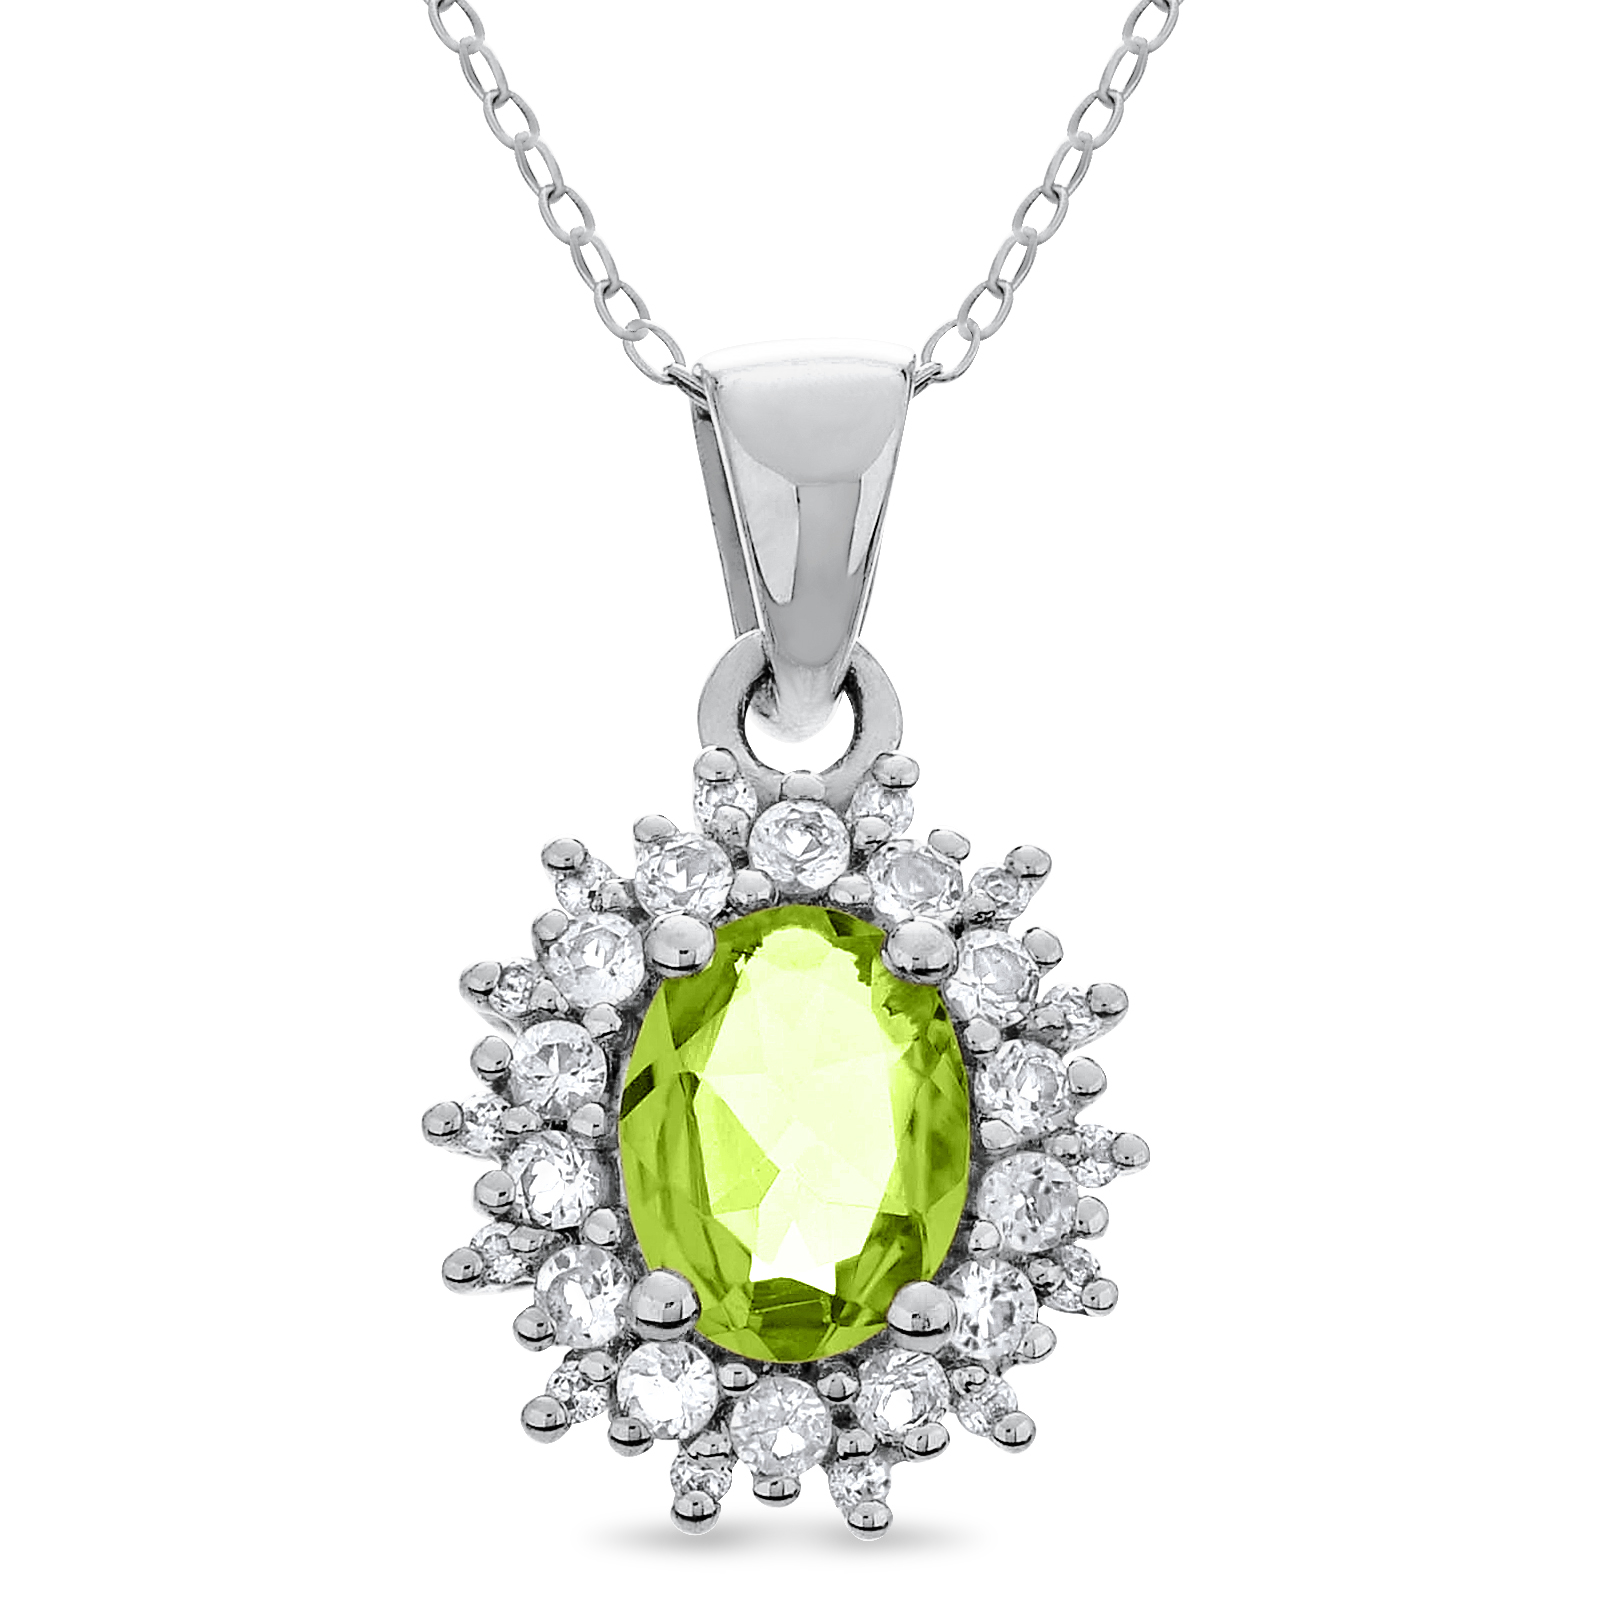 Sterling Silver 9x7 Oval Peridot and White Topaz Pendant